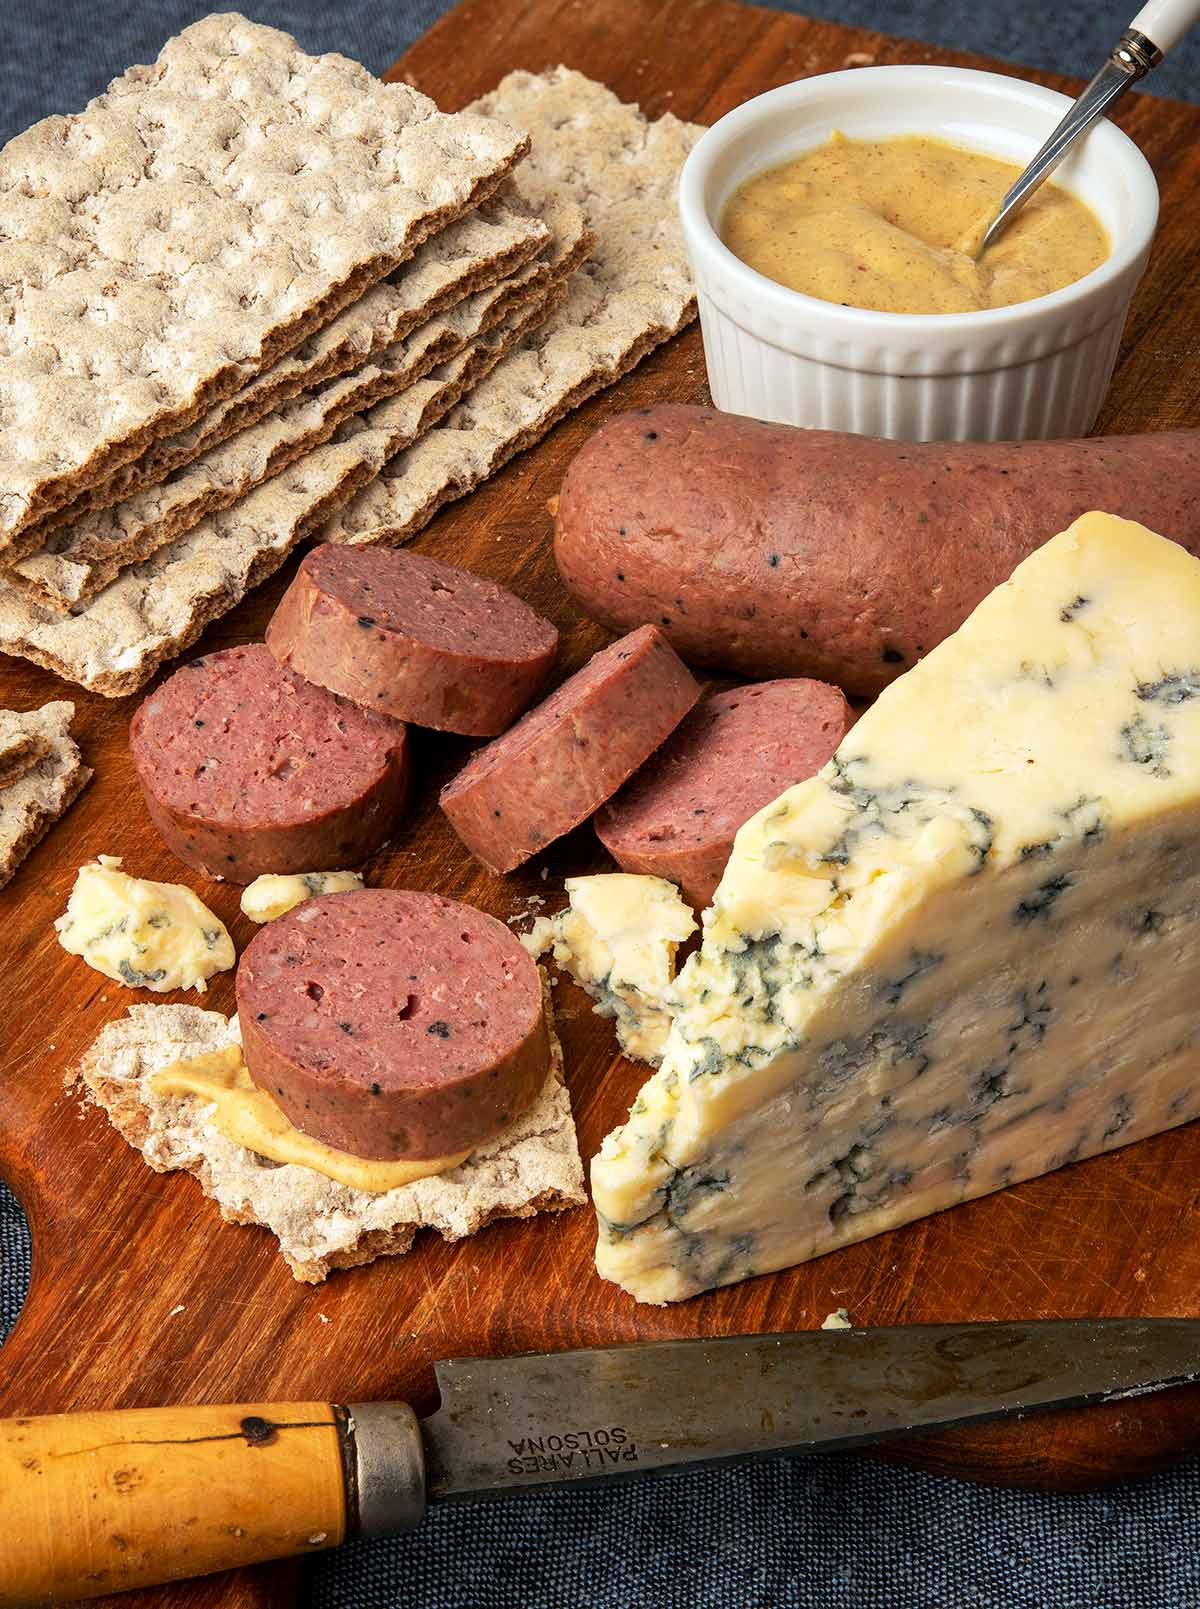 Slices of braunschweiger sausage with crackers, mustard and blue cheese. 